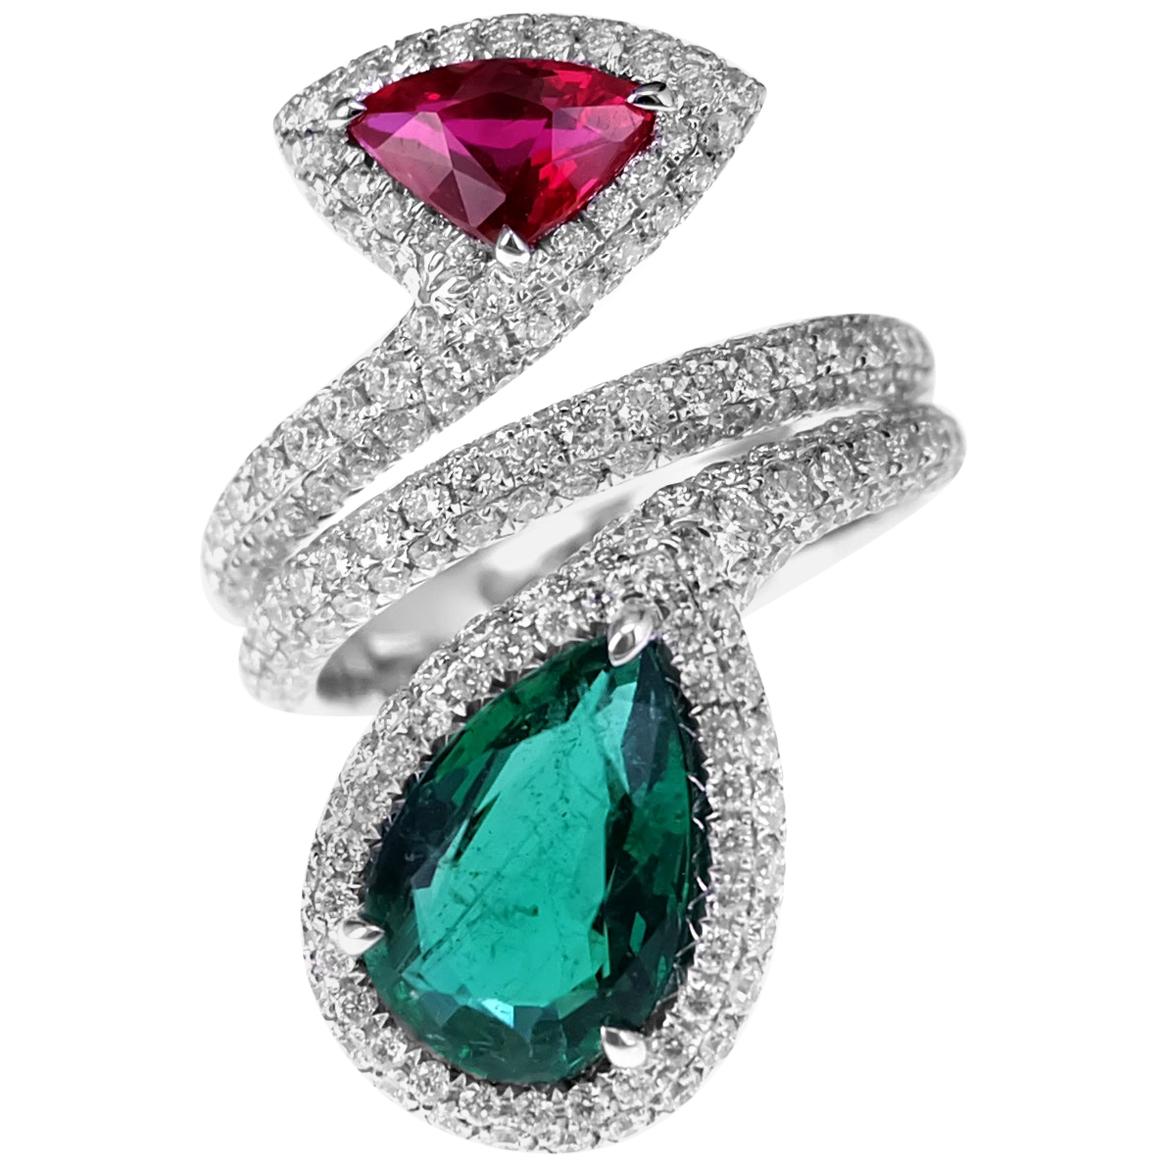 2.29 Carat Radiant Green Emerald and 1.02 Carat Blistering Red Ruby Ring